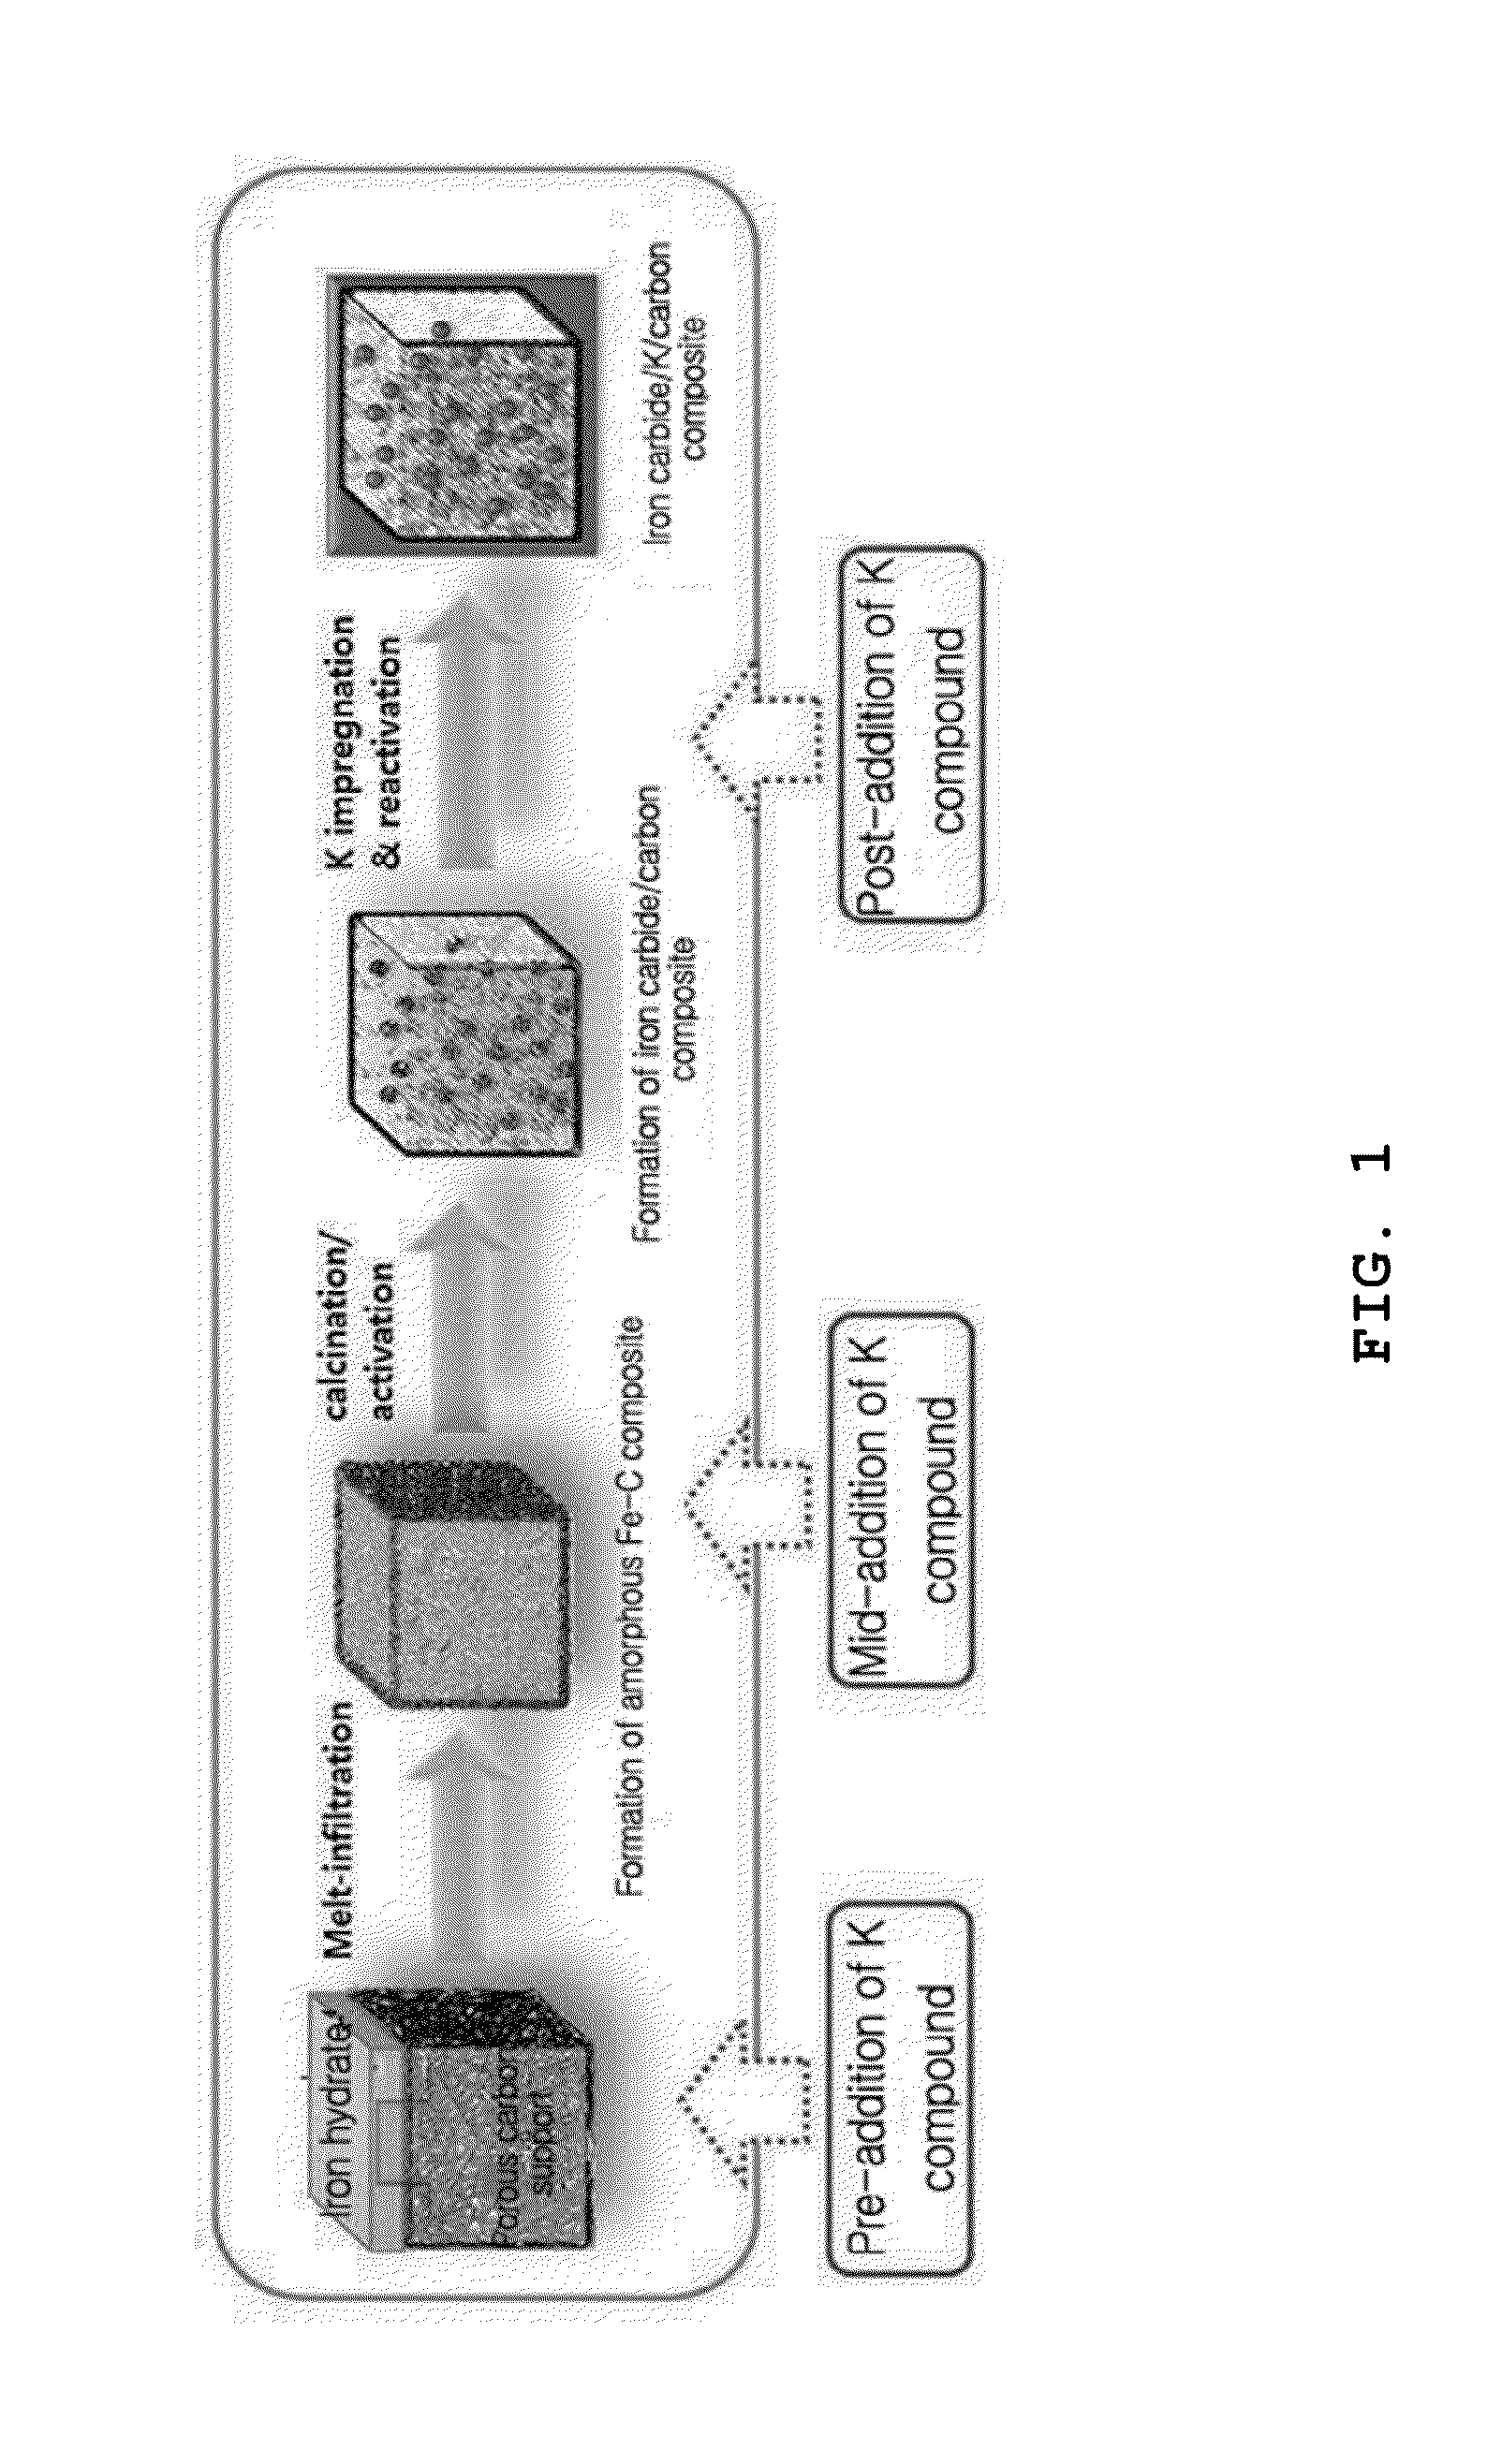 Method of preparing iron carbide/carbon nanocomposite catalyst containing potassium for high temperature fischer-tropsch synthesis reaction and the iron carbide/carbon nanocomposite catalyst prepared thereby, and method of manufacturing liquid hydrocarbon using the same and liquid hydrocarbon manufactured thereby